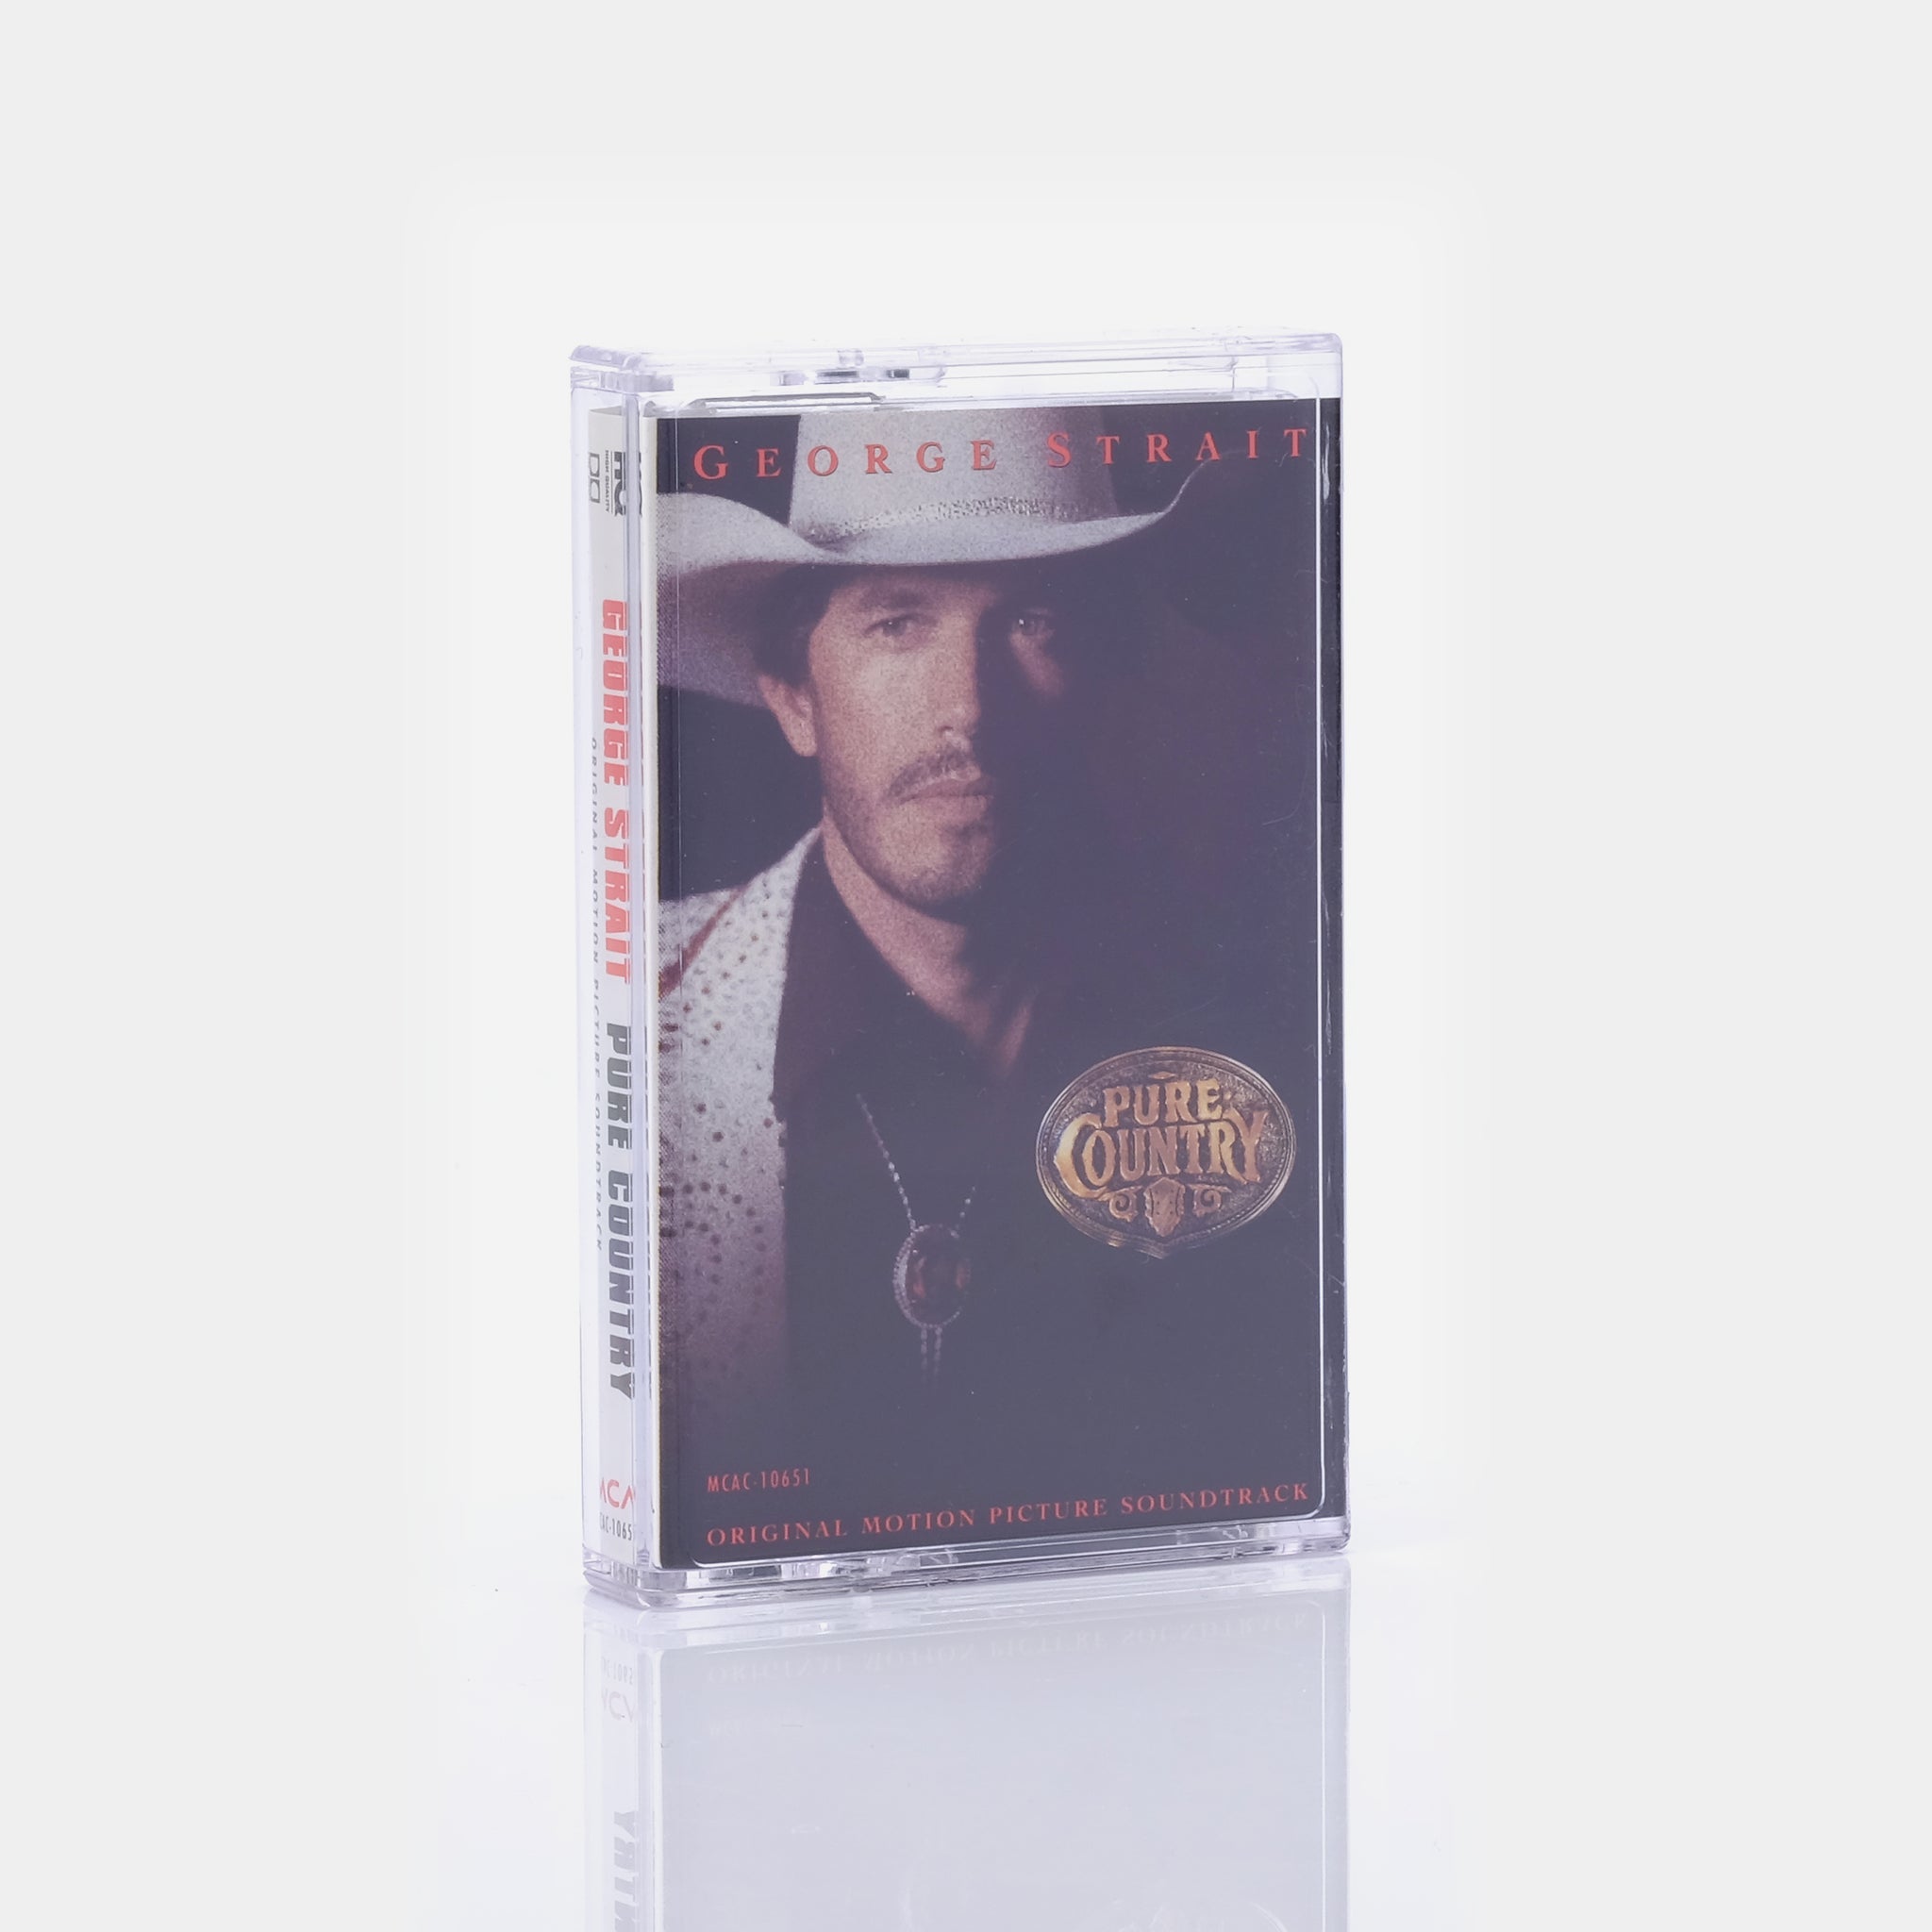 George Strait - Pure Country (Original Motion Picture Soundtrack) Cass